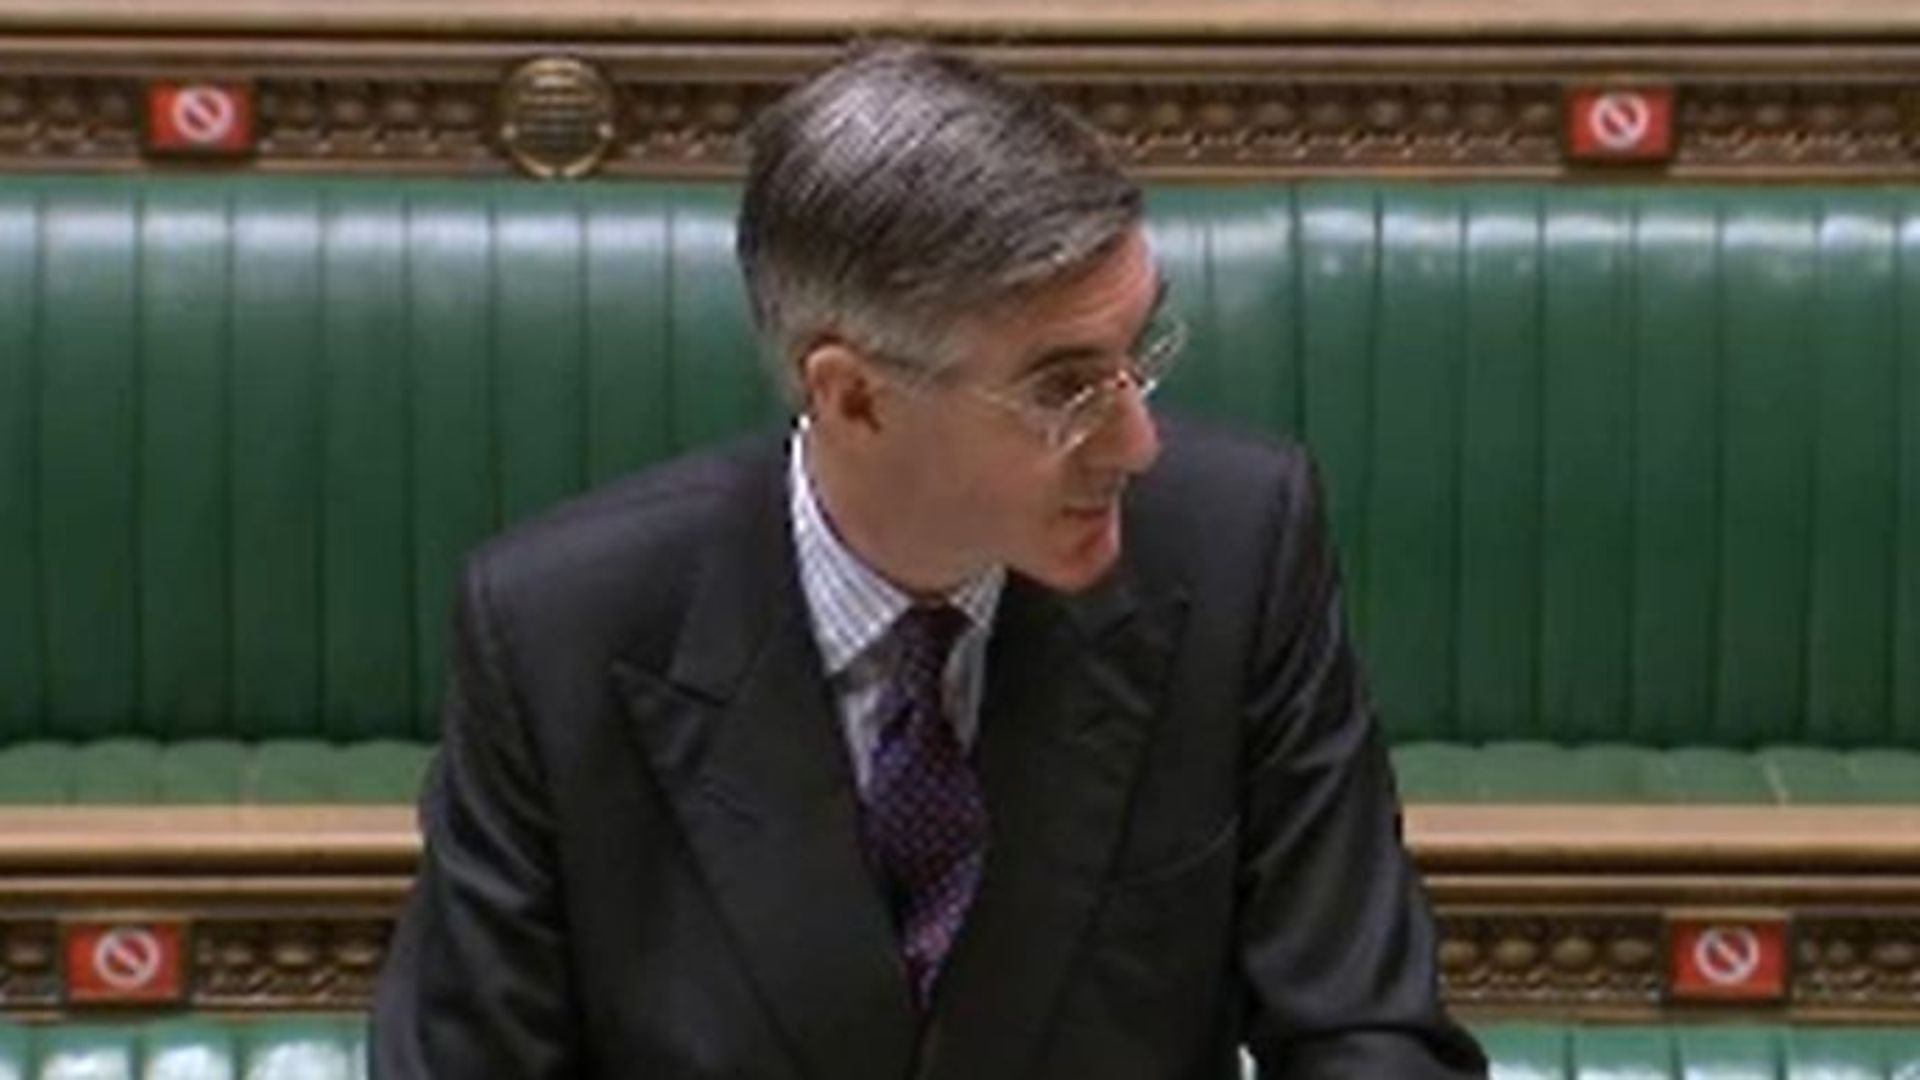 Jacob Rees-Mogg in the House of Commons - Credit: Parliamentlive.tv